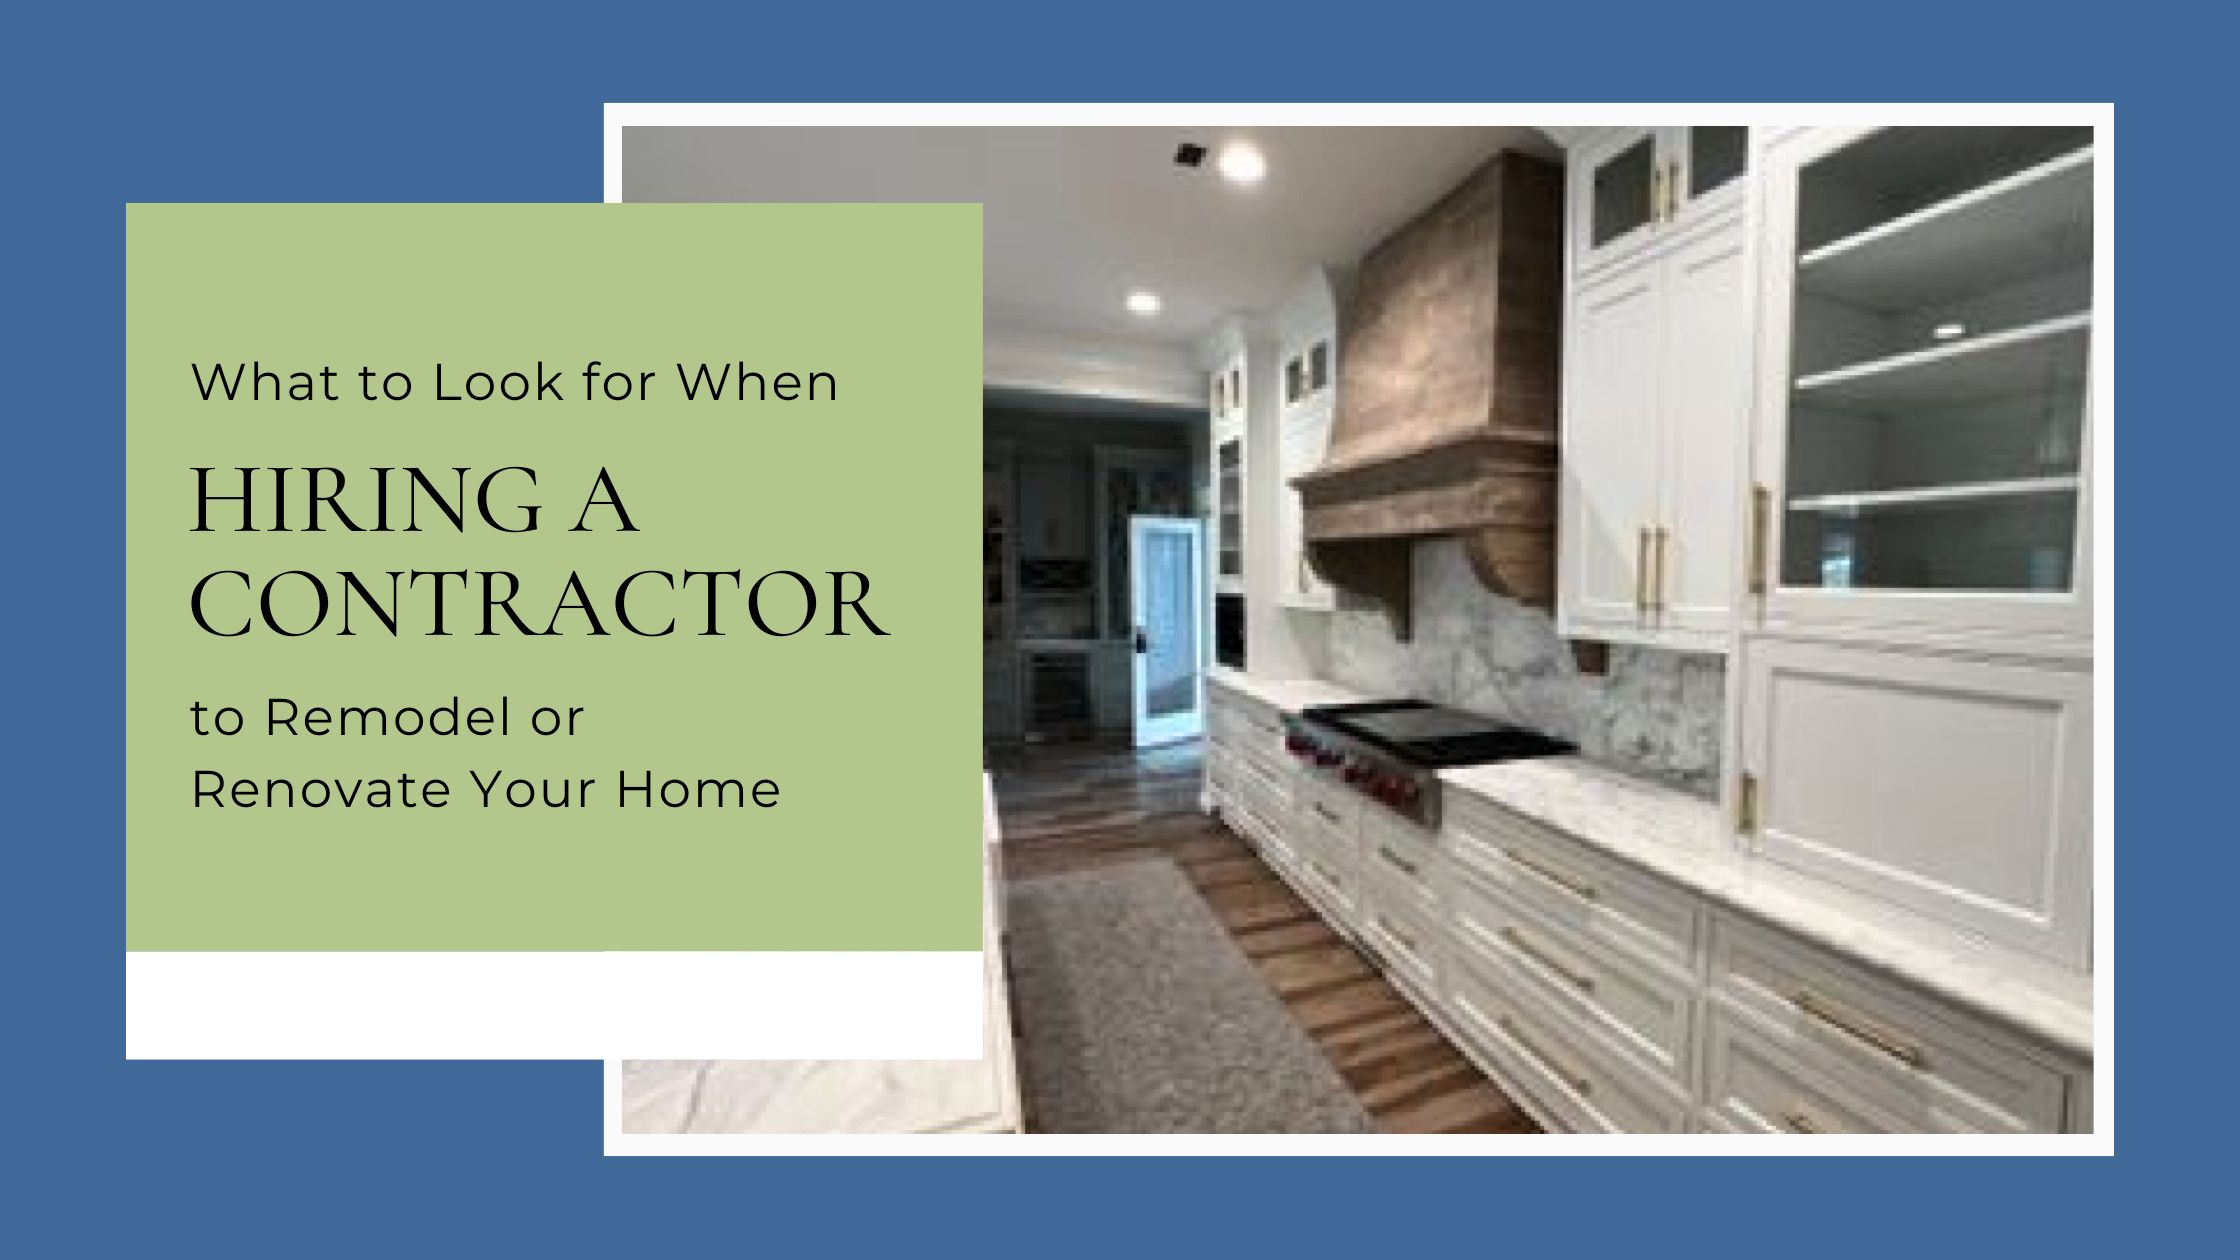 What to Look for When Hiring a Contractor to Remodel or Renovate Your Home